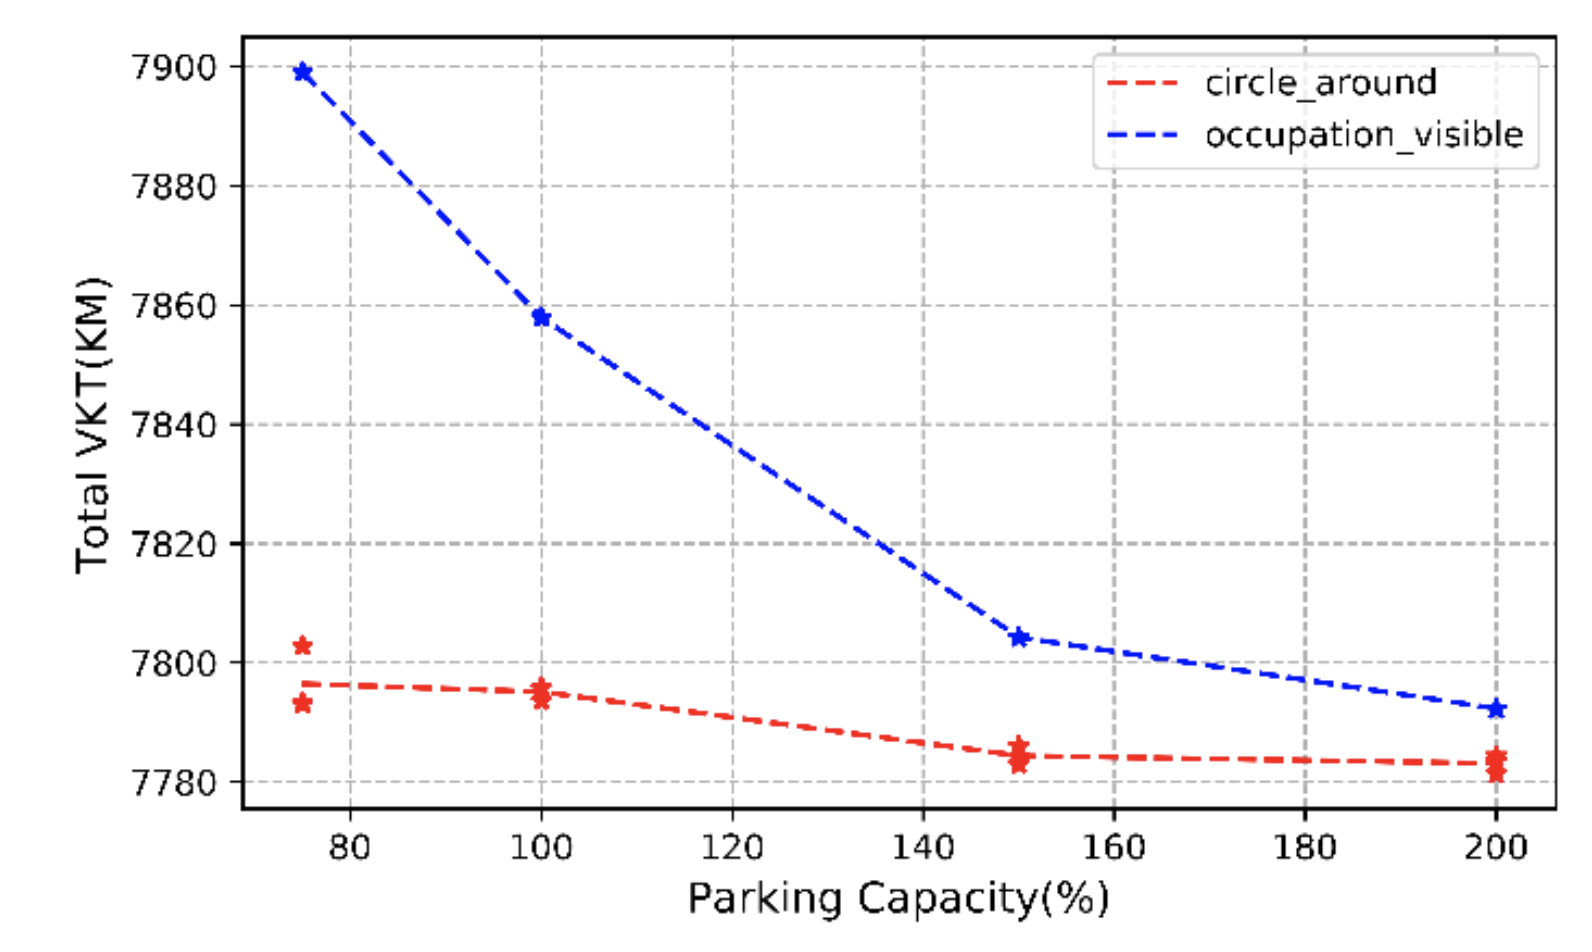 Image from research report containing a graph showing the total VKT(KM) for the parking capacity in percent